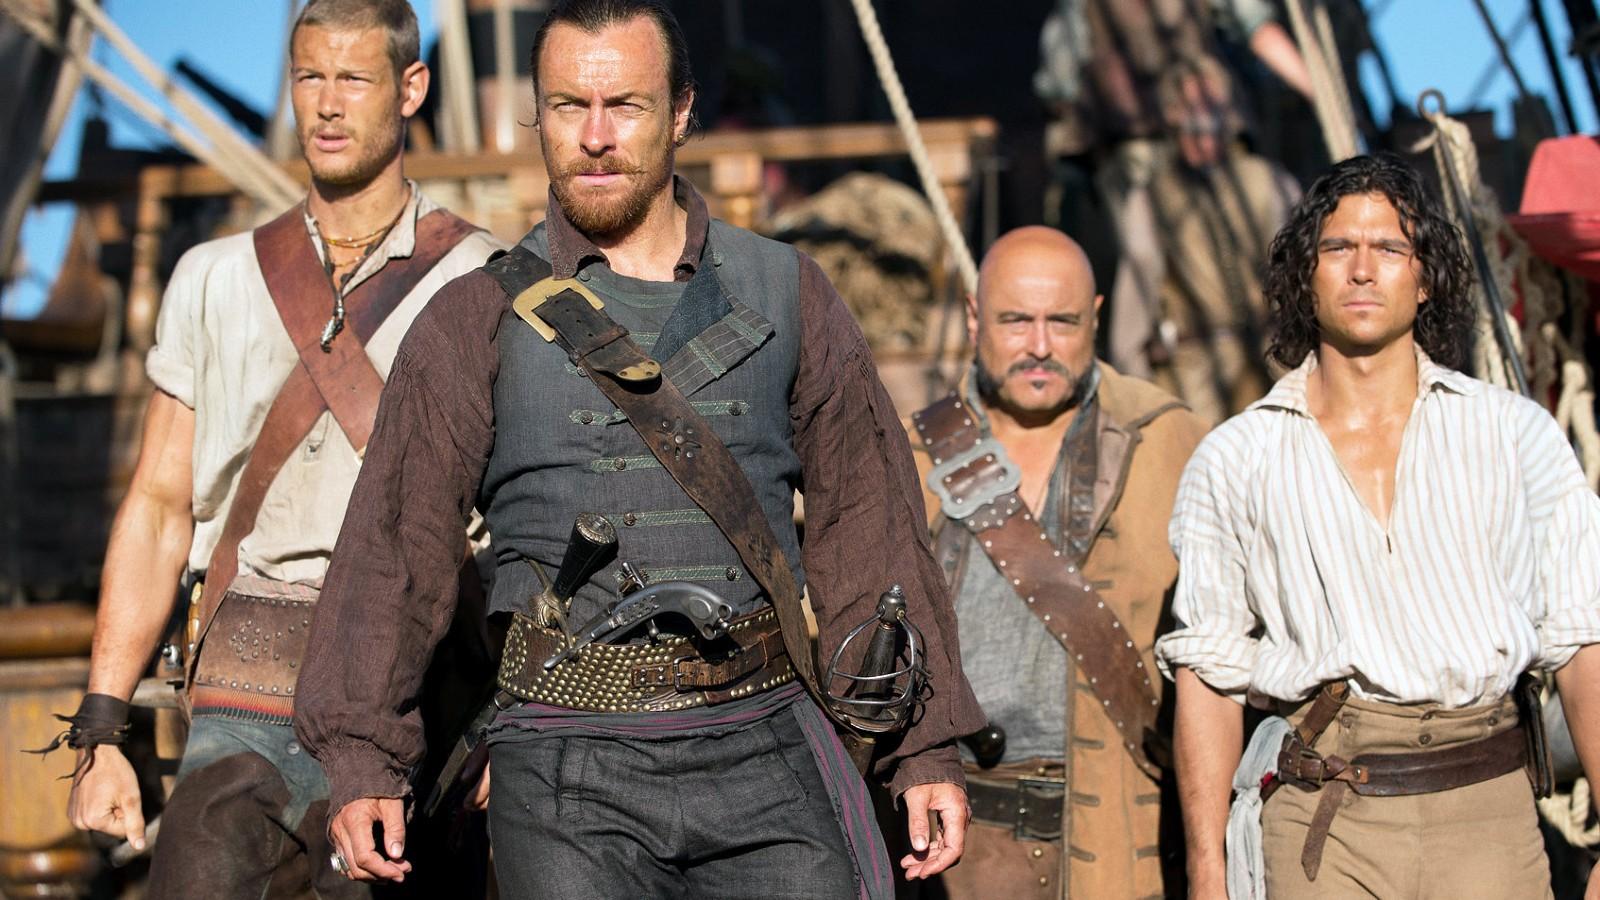 Toby Stephens leads his crew in Black Sails.